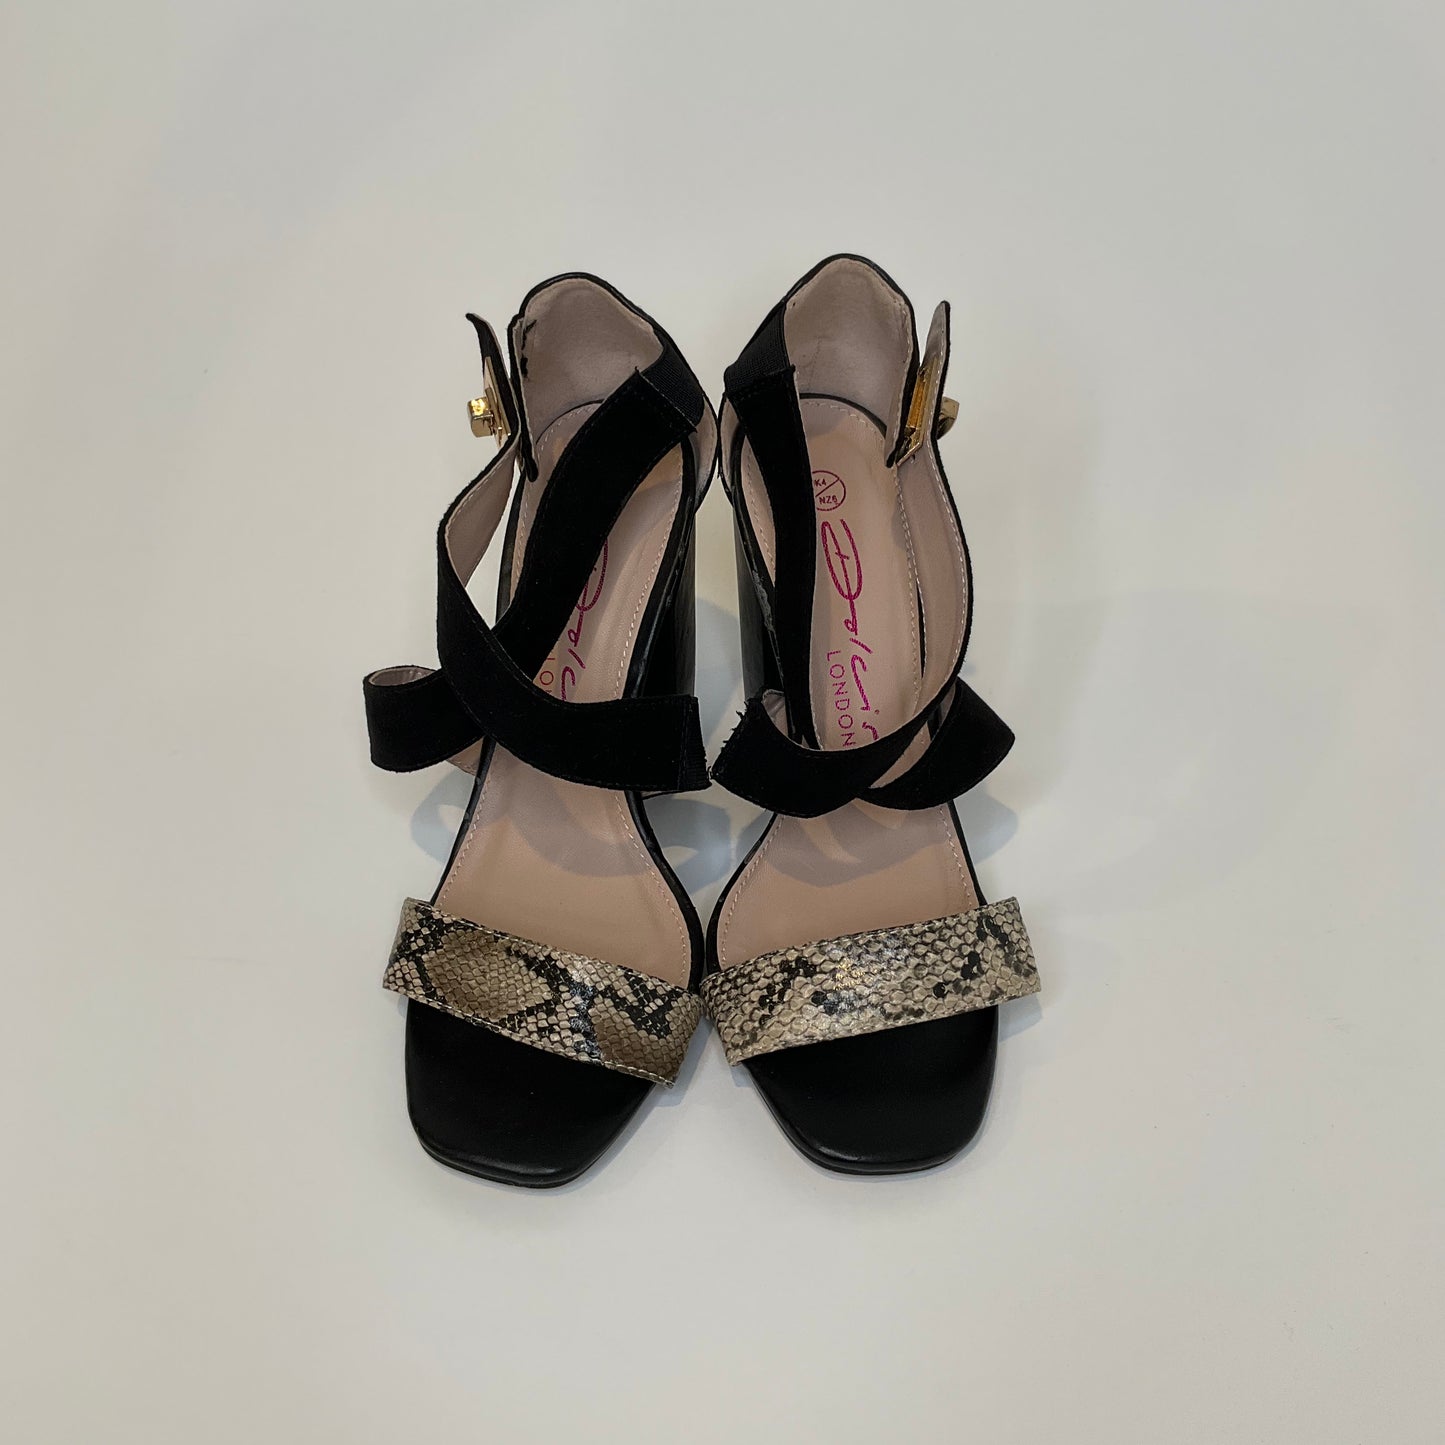 Dolcis - Shoes - Size 6